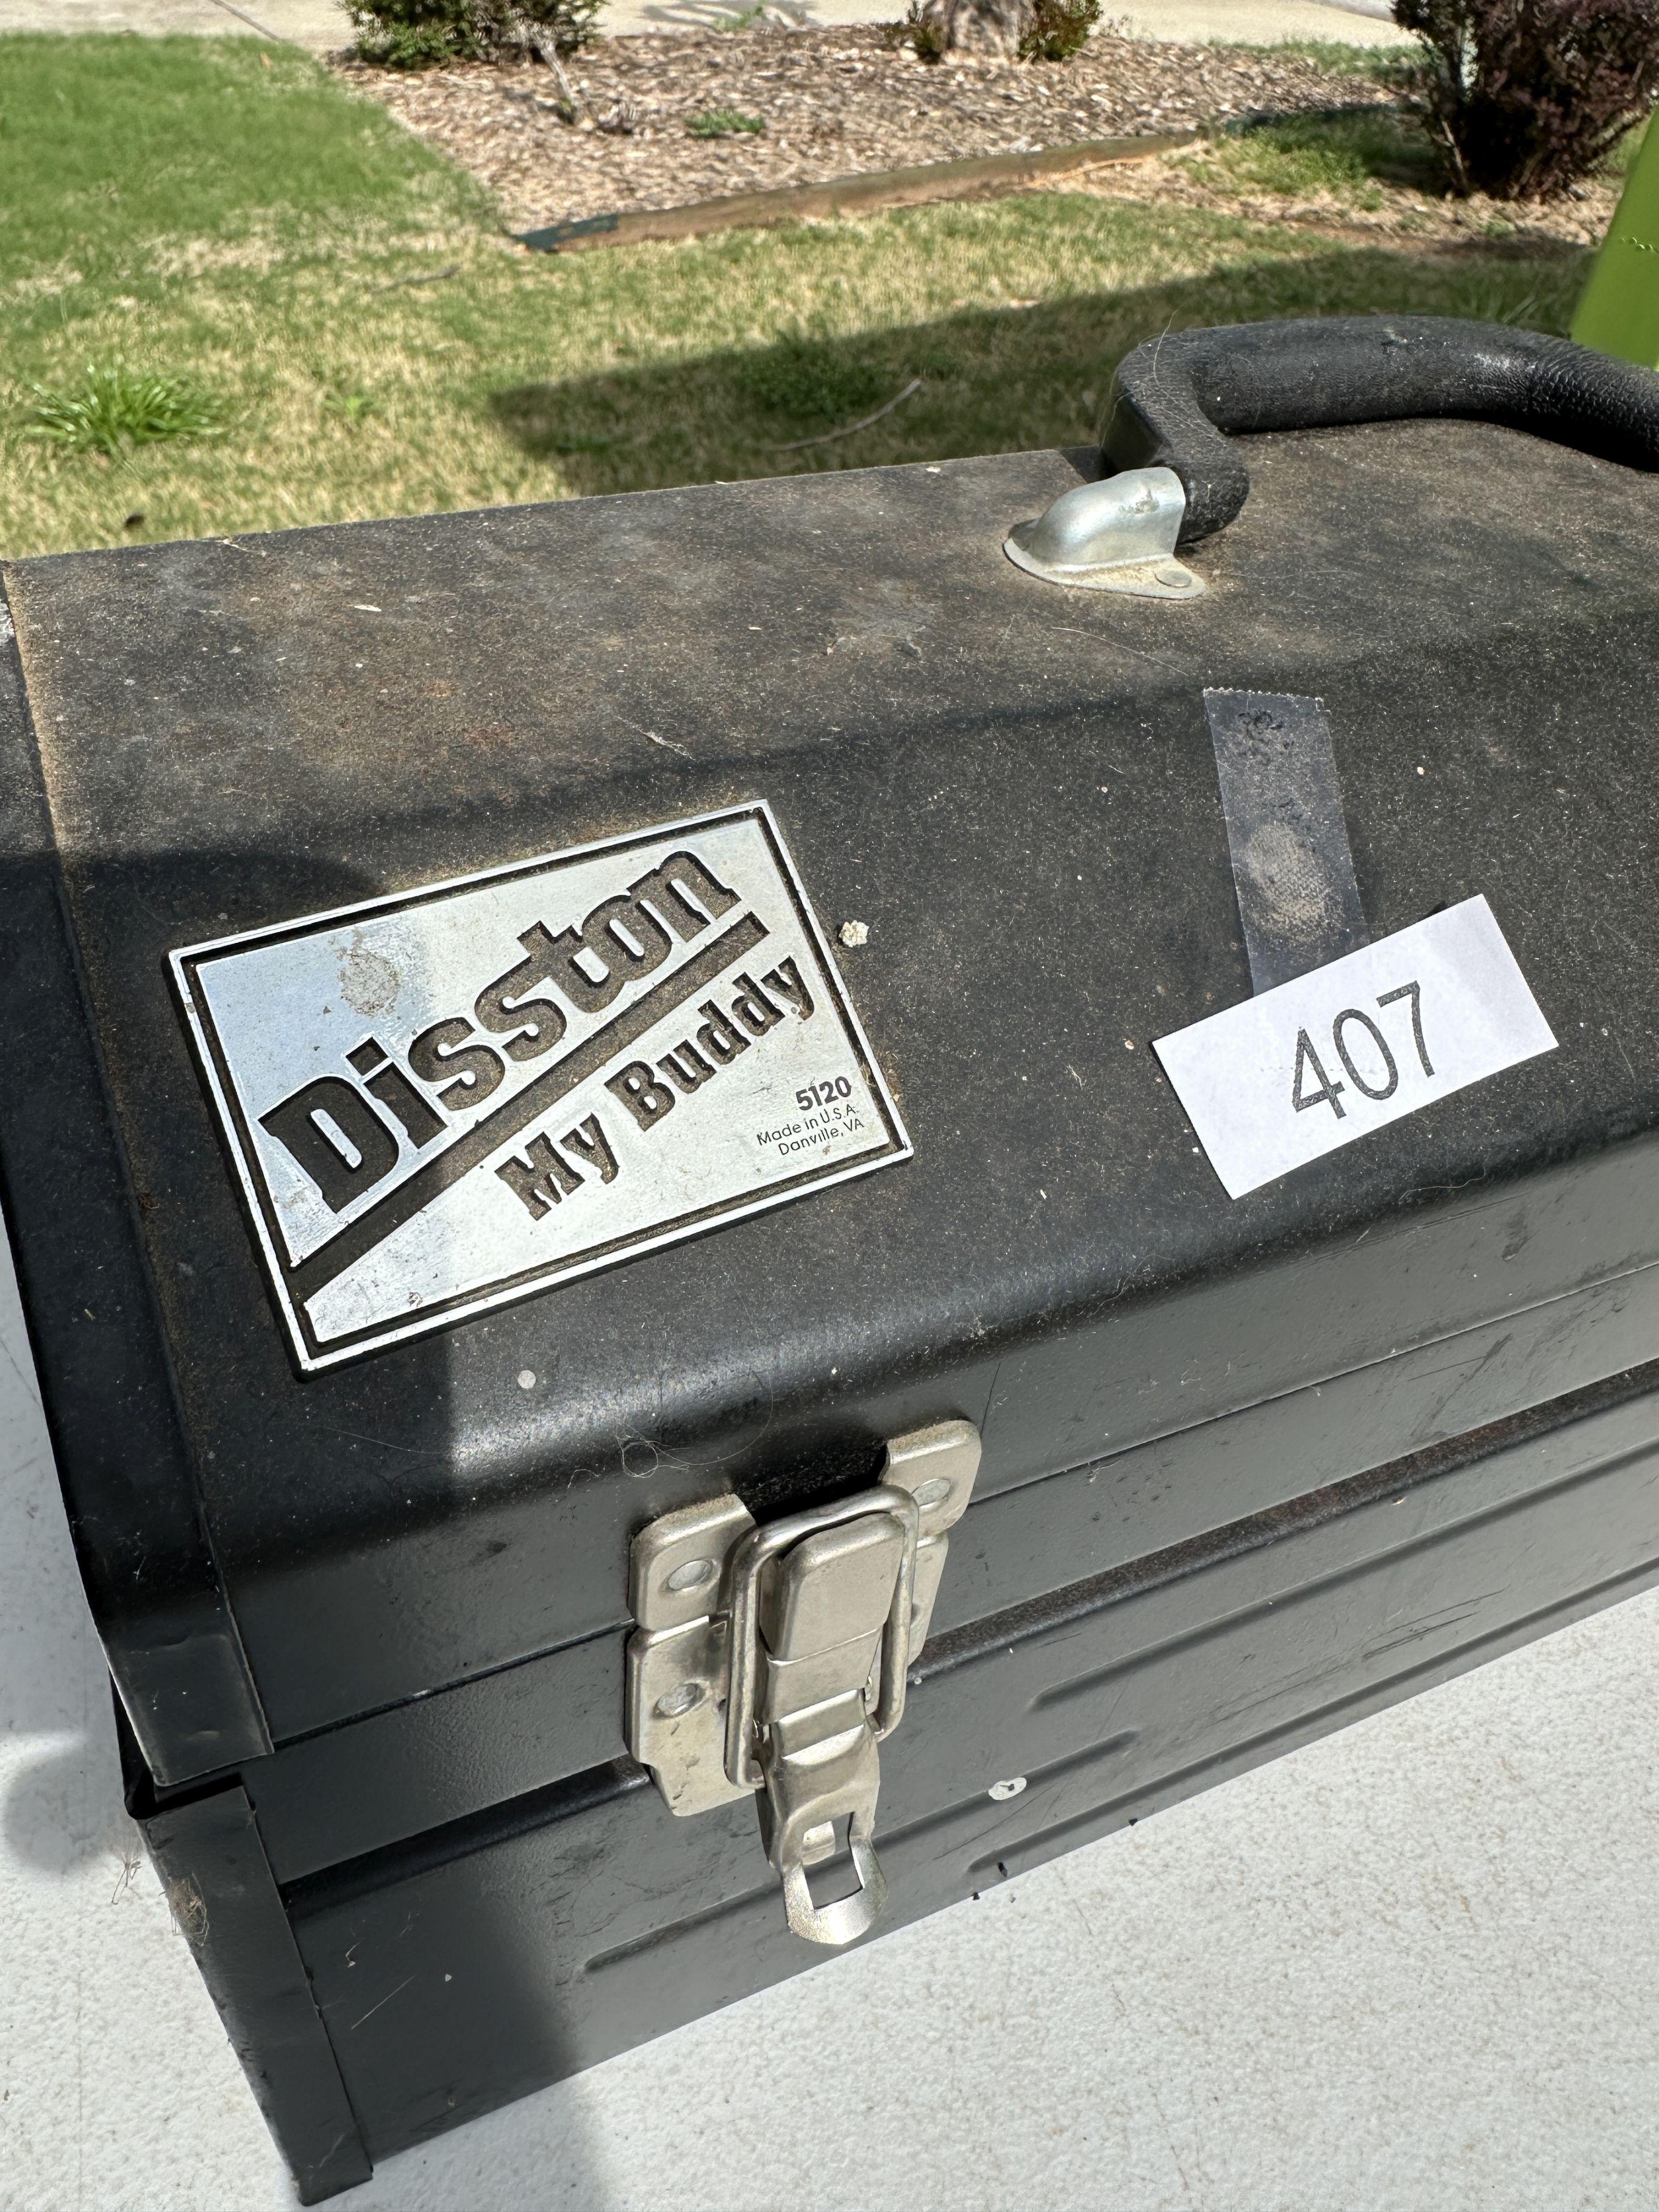 Approx 20 Inch Long Disston My Buddy Metal Tool Box with Misc Tools